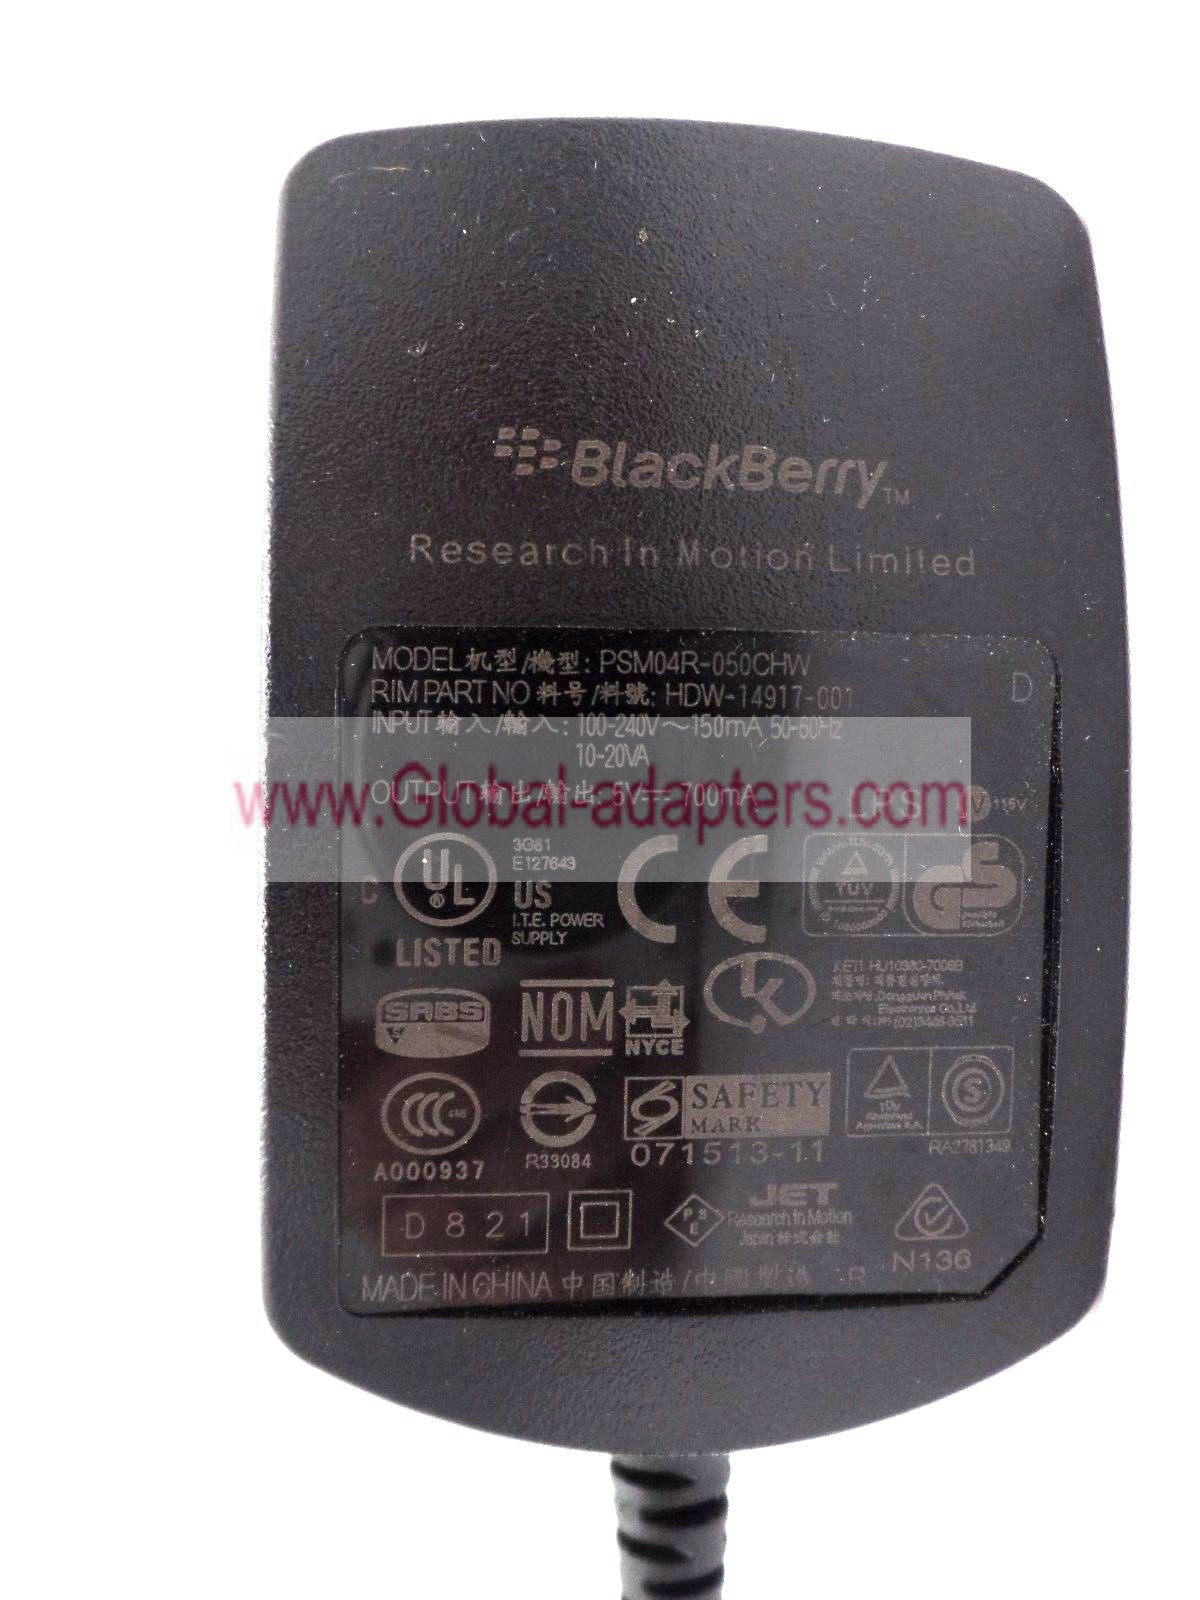 New BLACKBERRY PSM04R-050CHW 5V 700mA HDW-14917-001 AC/DC ADAPTER - Click Image to Close